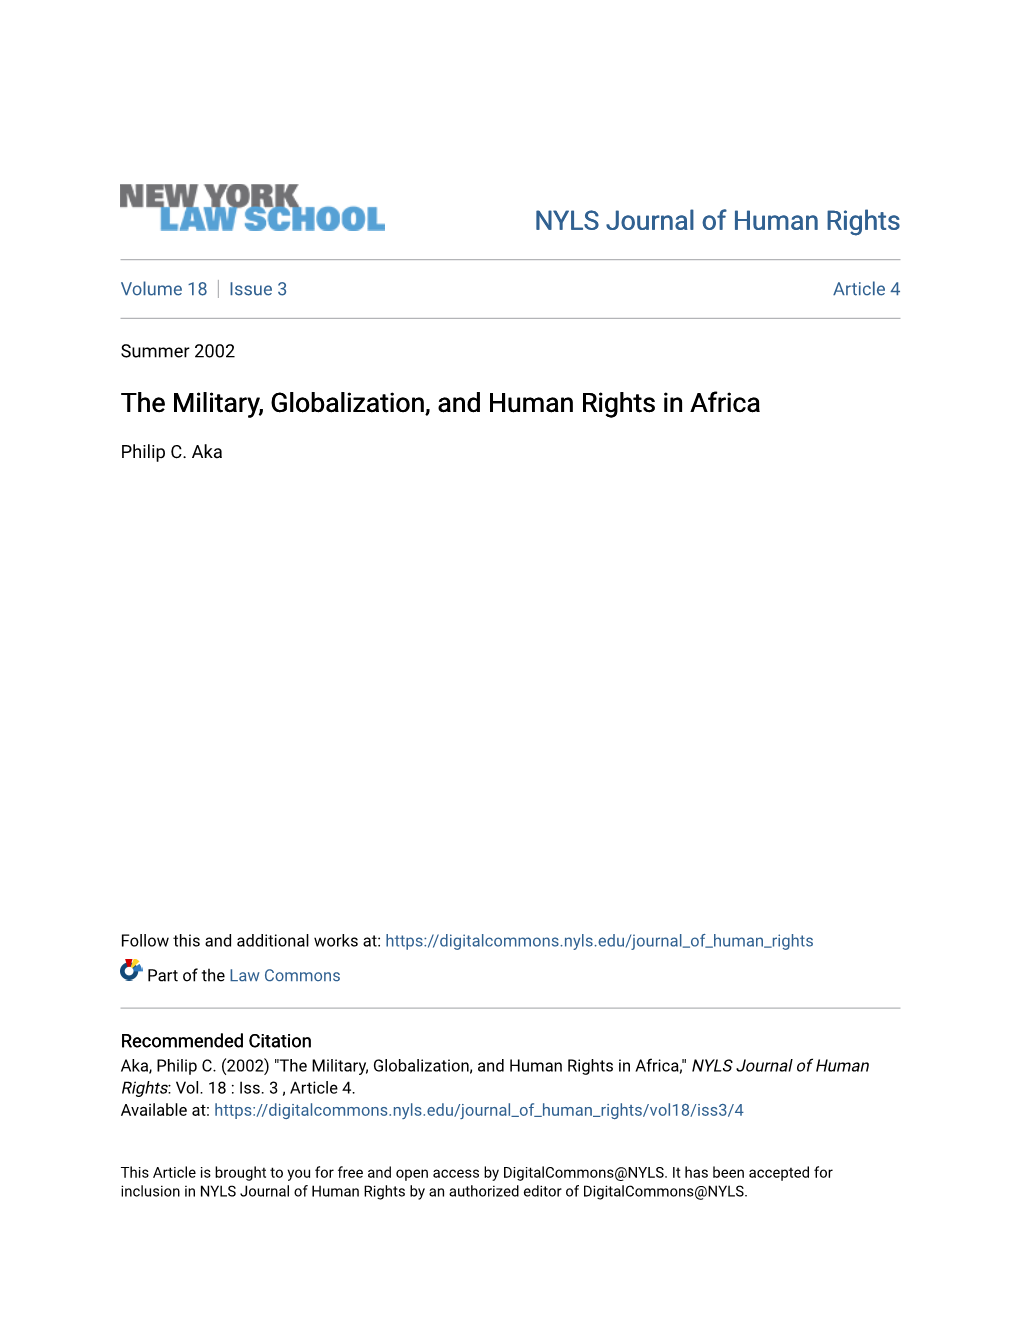 The Military, Globalization, and Human Rights in Africa